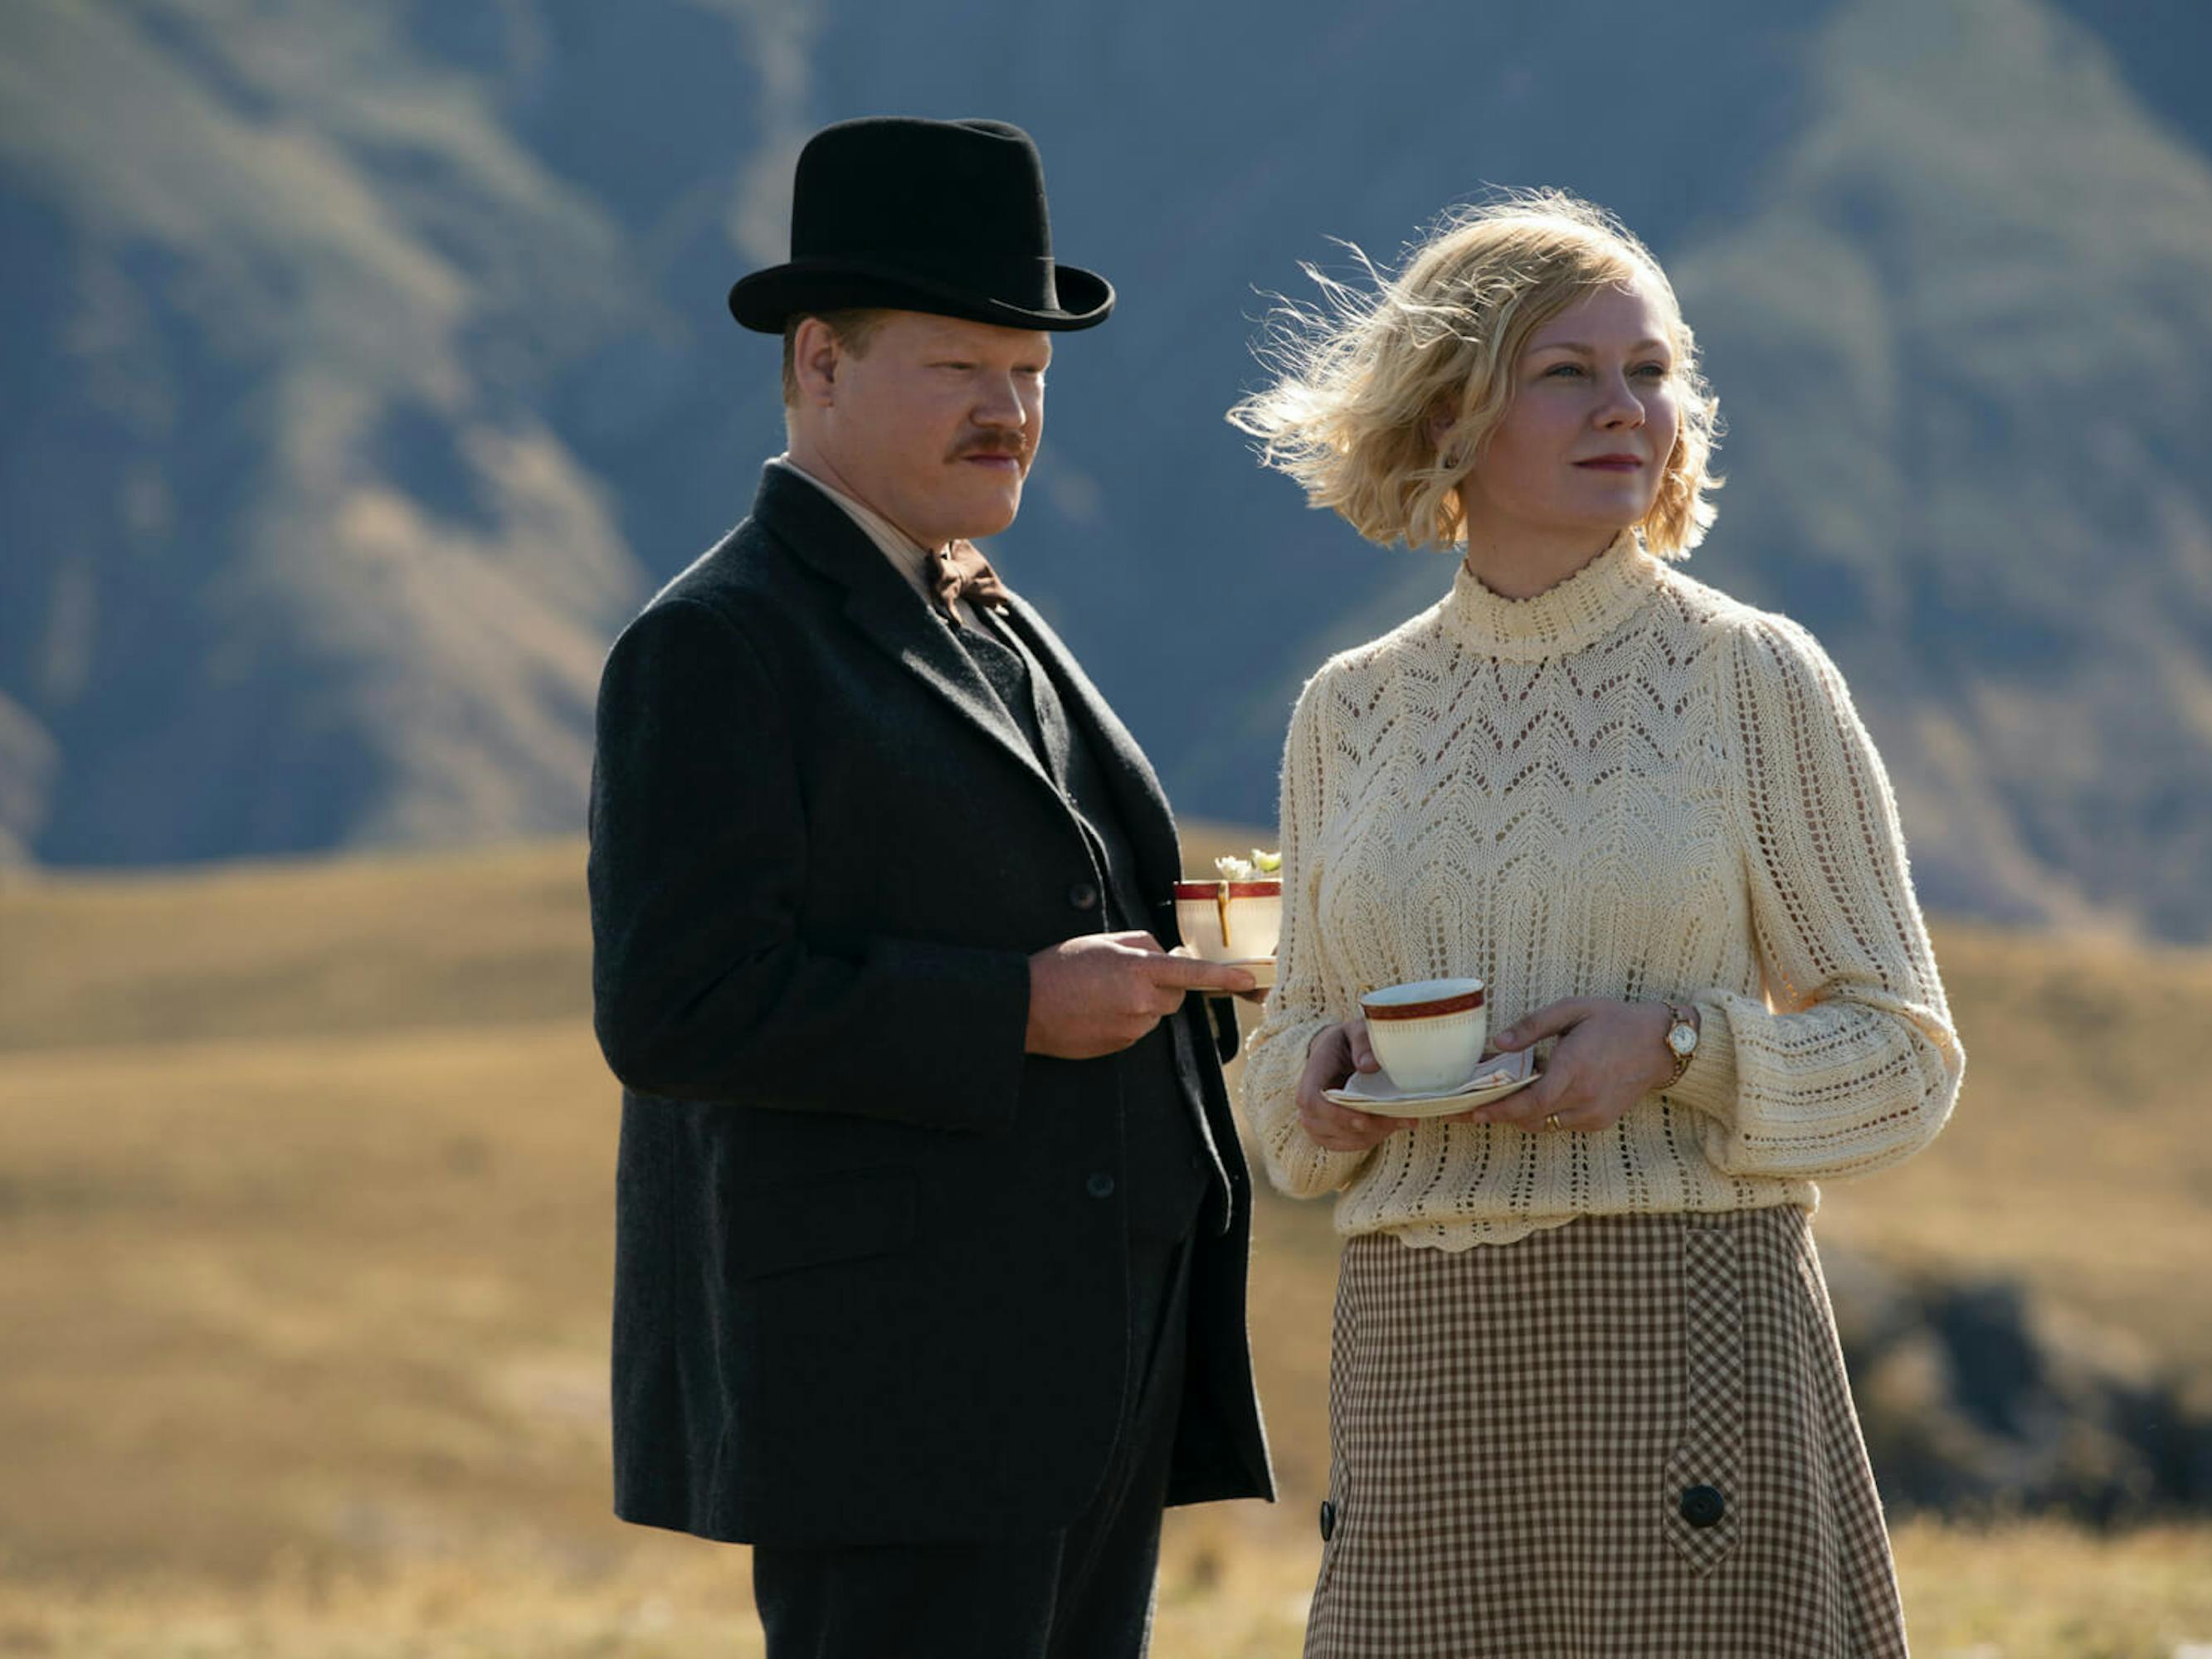 George Burbank (Jesse Plemons) and Rose (Kirsten Dunst) hold teacups and look out on a beautiful windswept scene. Plemons has a mustache and wears a dark suit, bowtie, and a bowler hat. Dunst wears a checkered skirt, and white sweater.